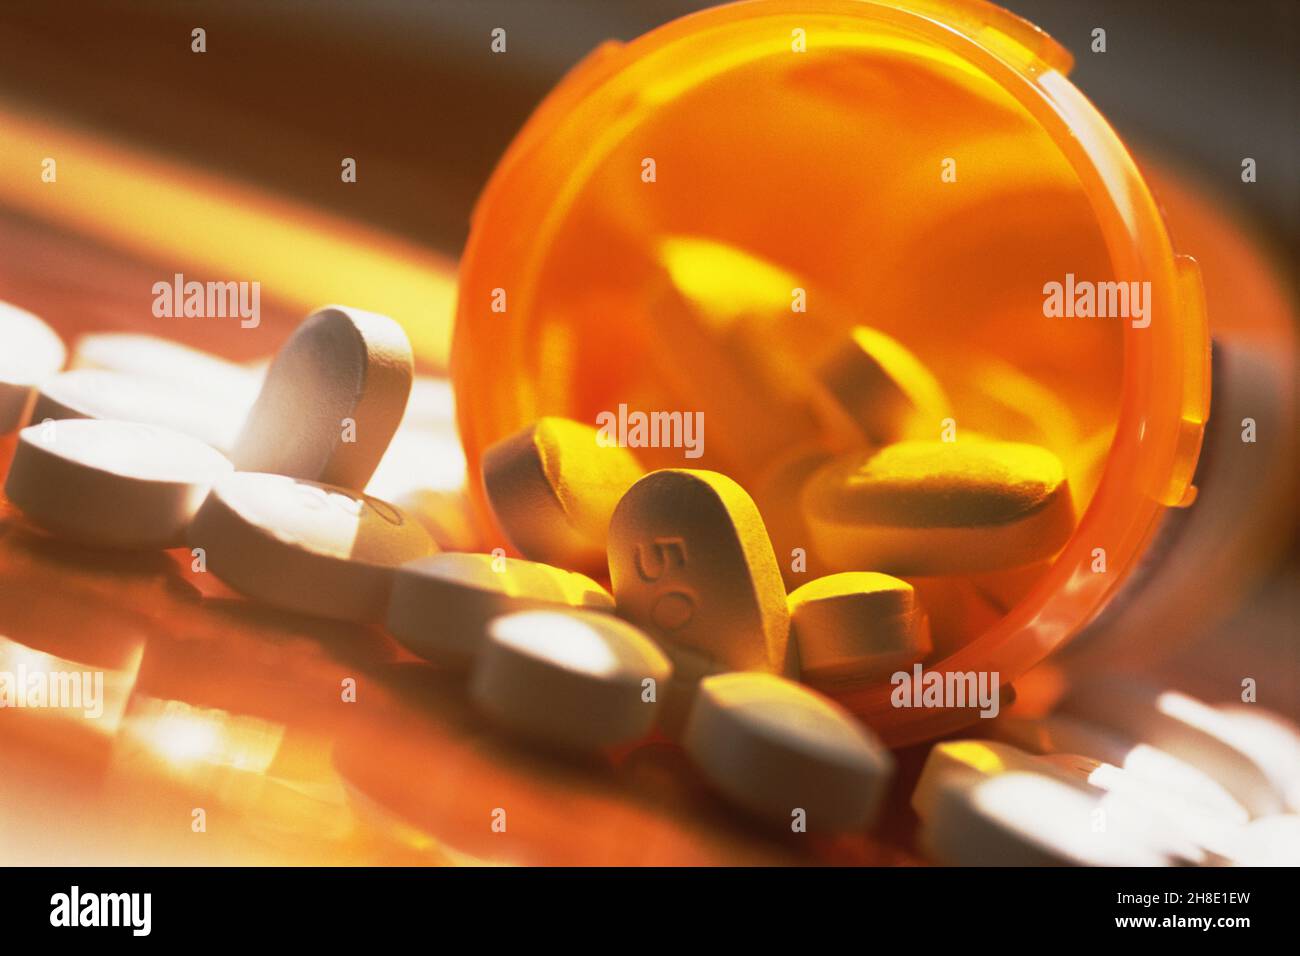 Pills spilling open container or bottle. Drugs, cure. Healthcare prescribed treatment medication for illness or pain. Drug addiction prescription. Stock Photo